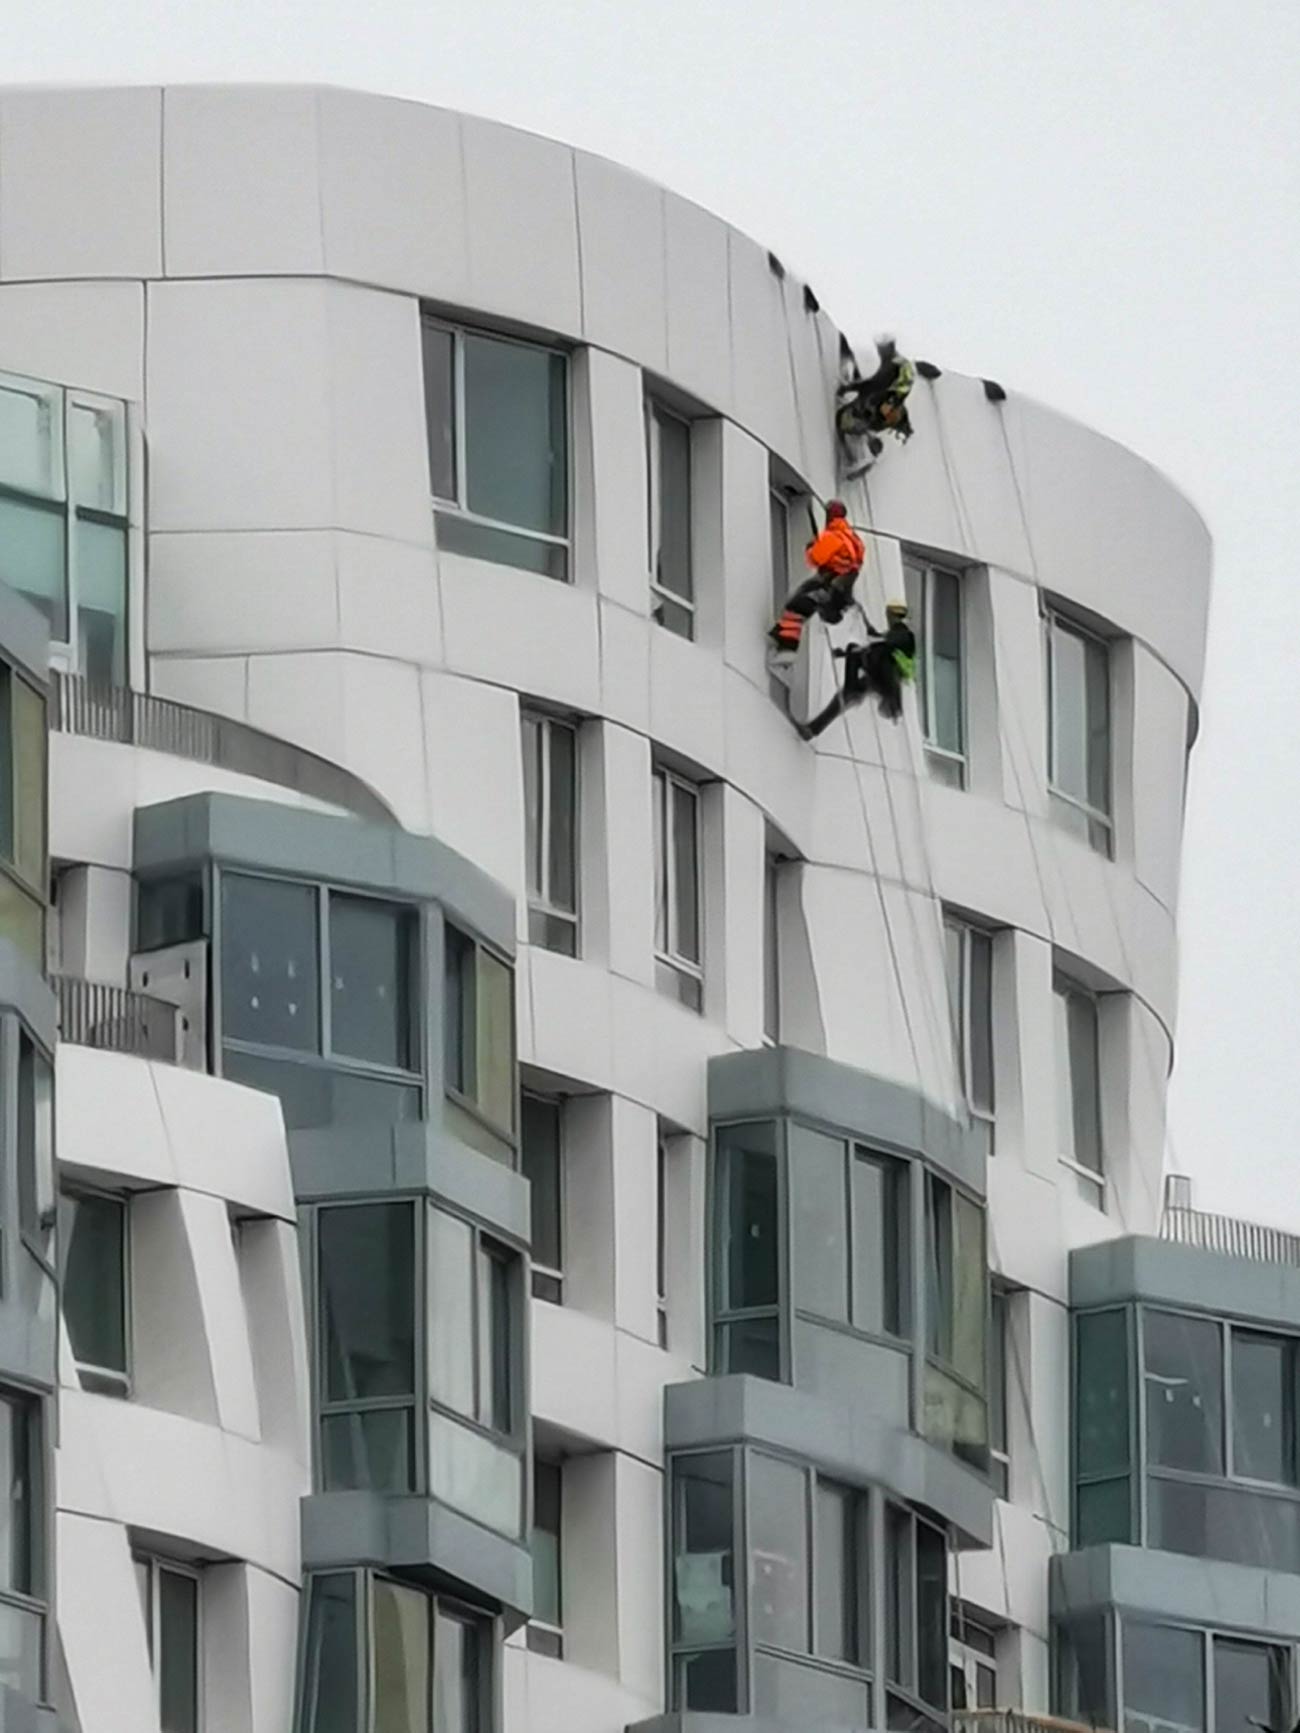 January - Rope access workers on Frank Gehry's Prospect Place